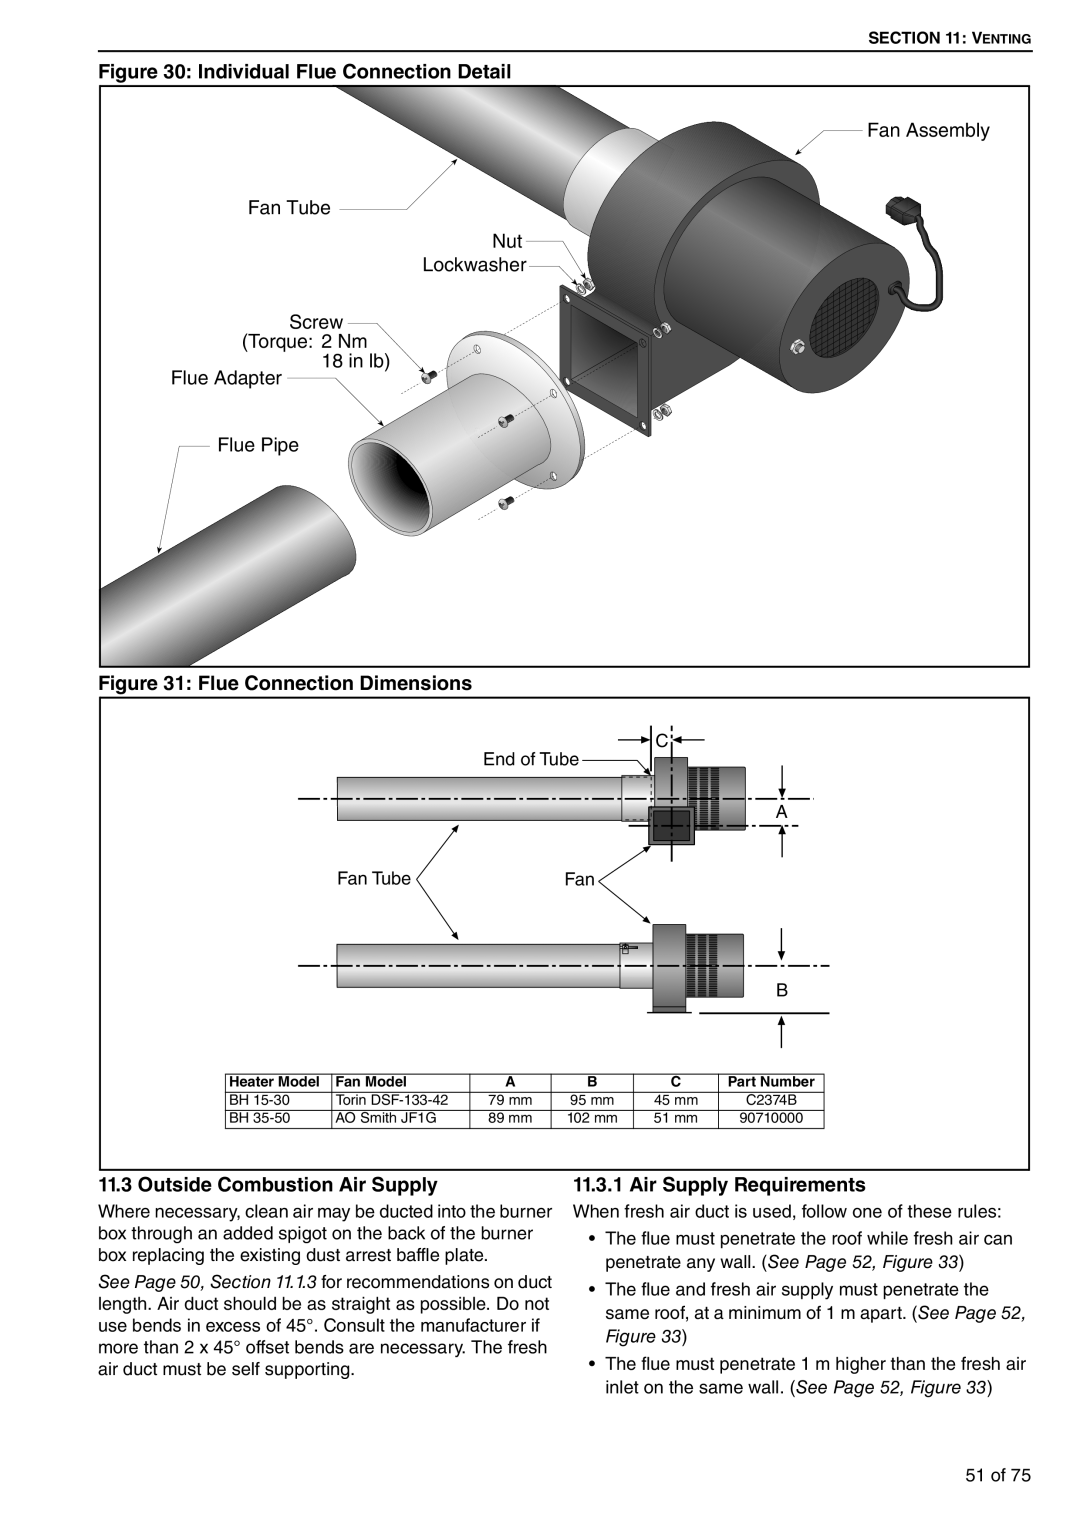 Roberts Gorden BH50ST/EF BH55ST Individual Flue Connection Detail, Flue Connection Dimensions, Air Supply Requirements 